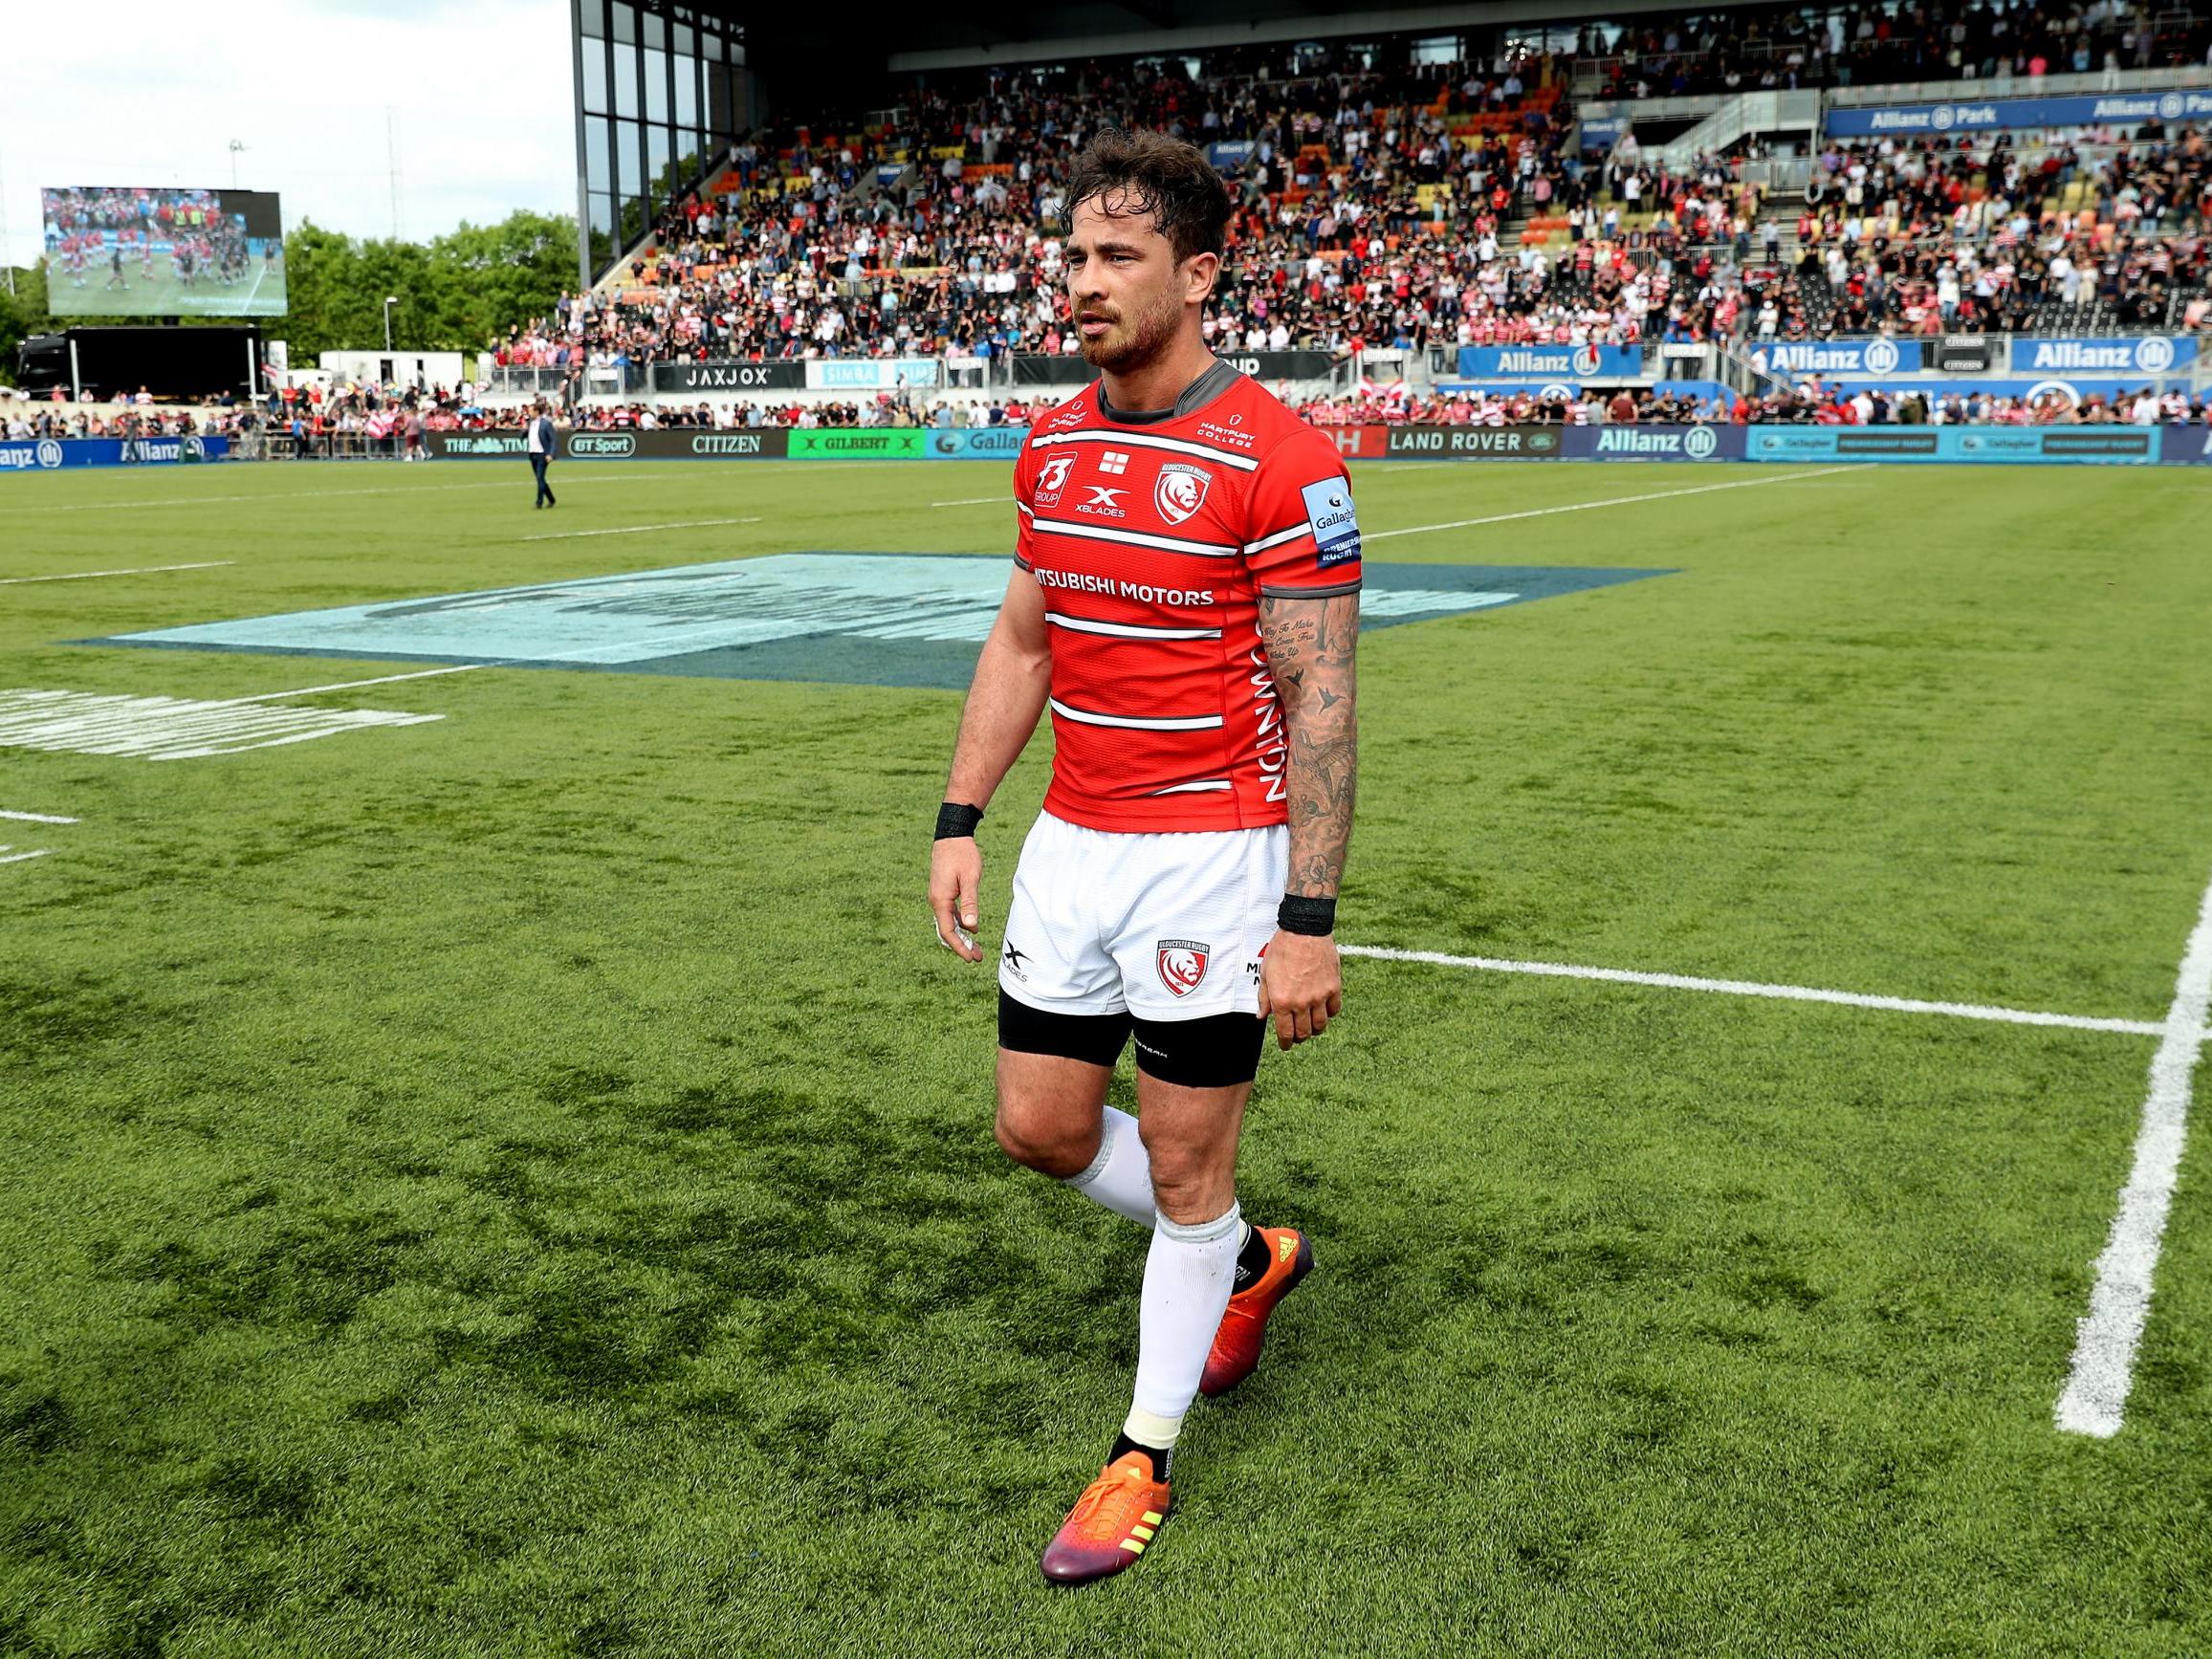 The fly-half was named Premiership and Rugby Players’ Association player of the year last season